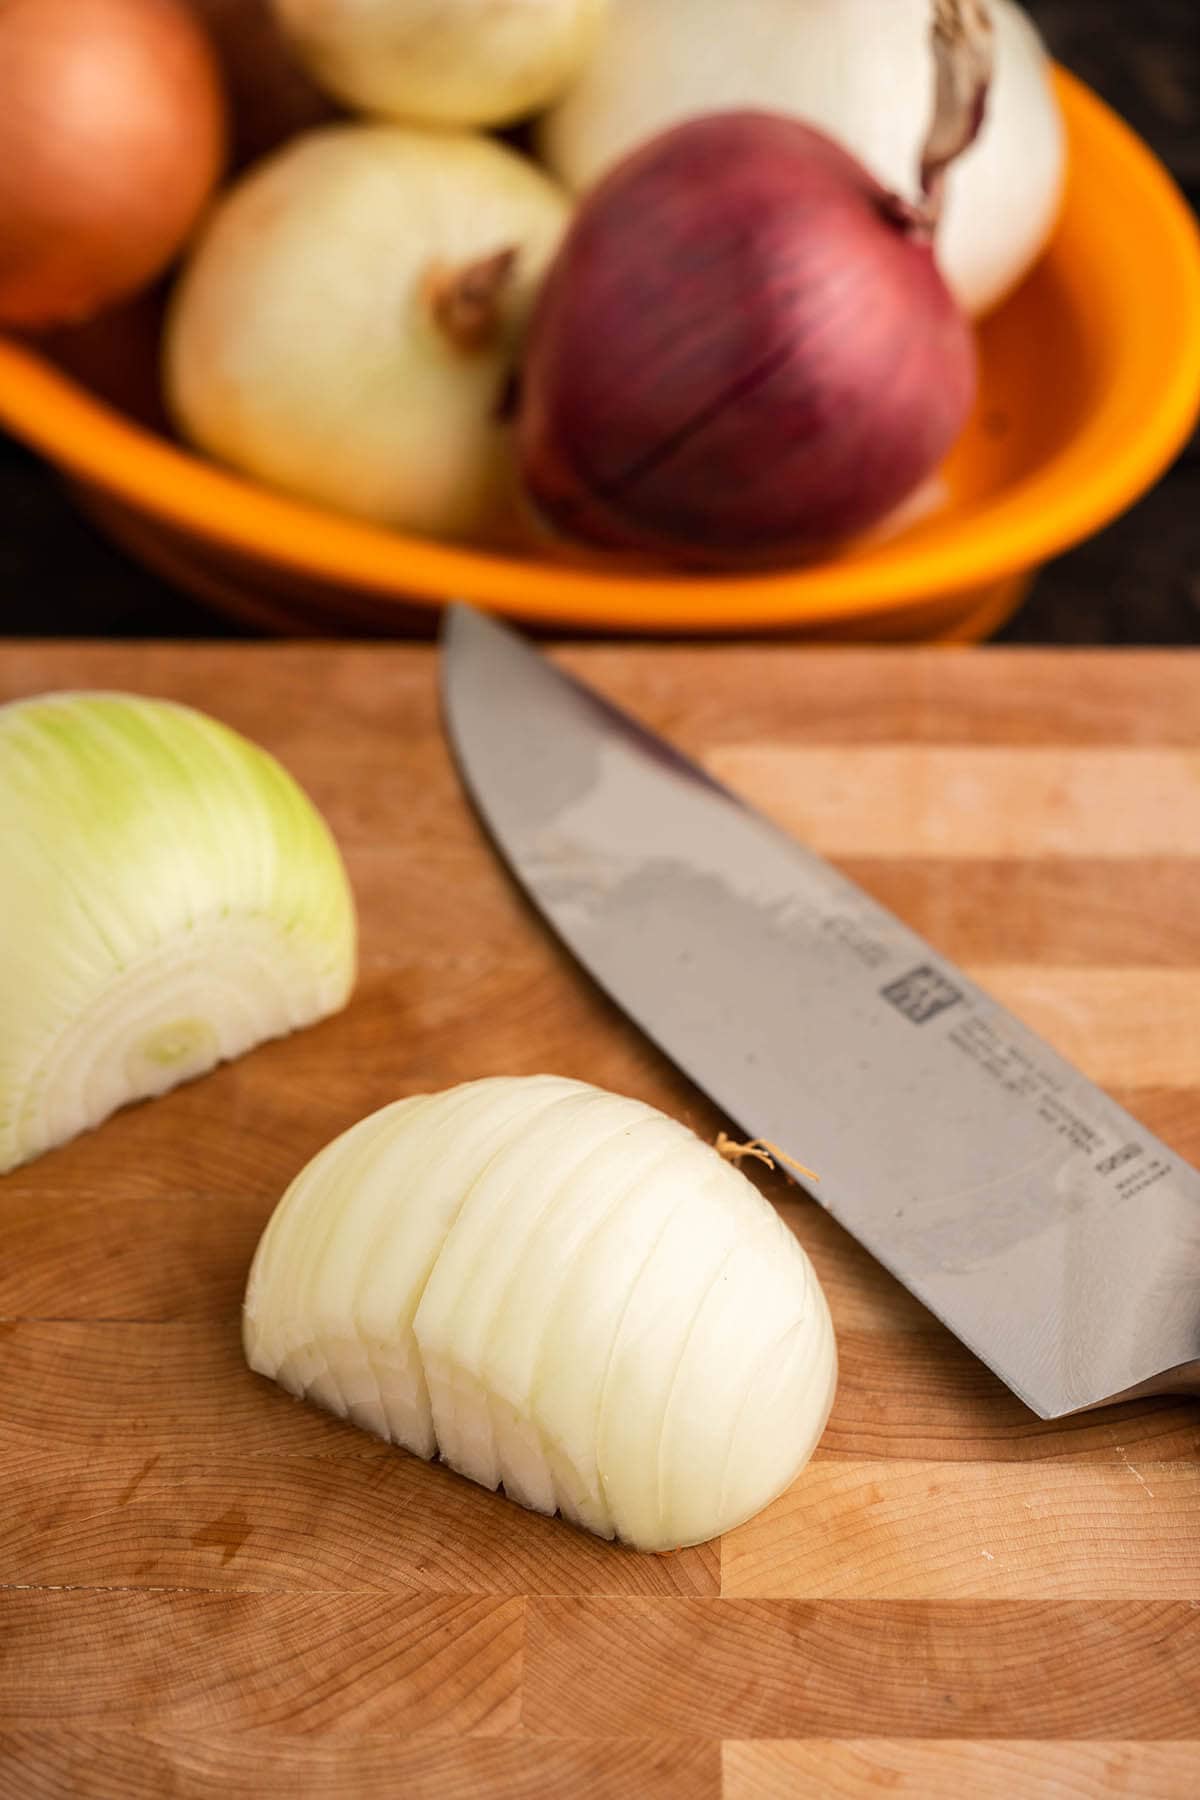 Peeled onion on cutting board with knife.